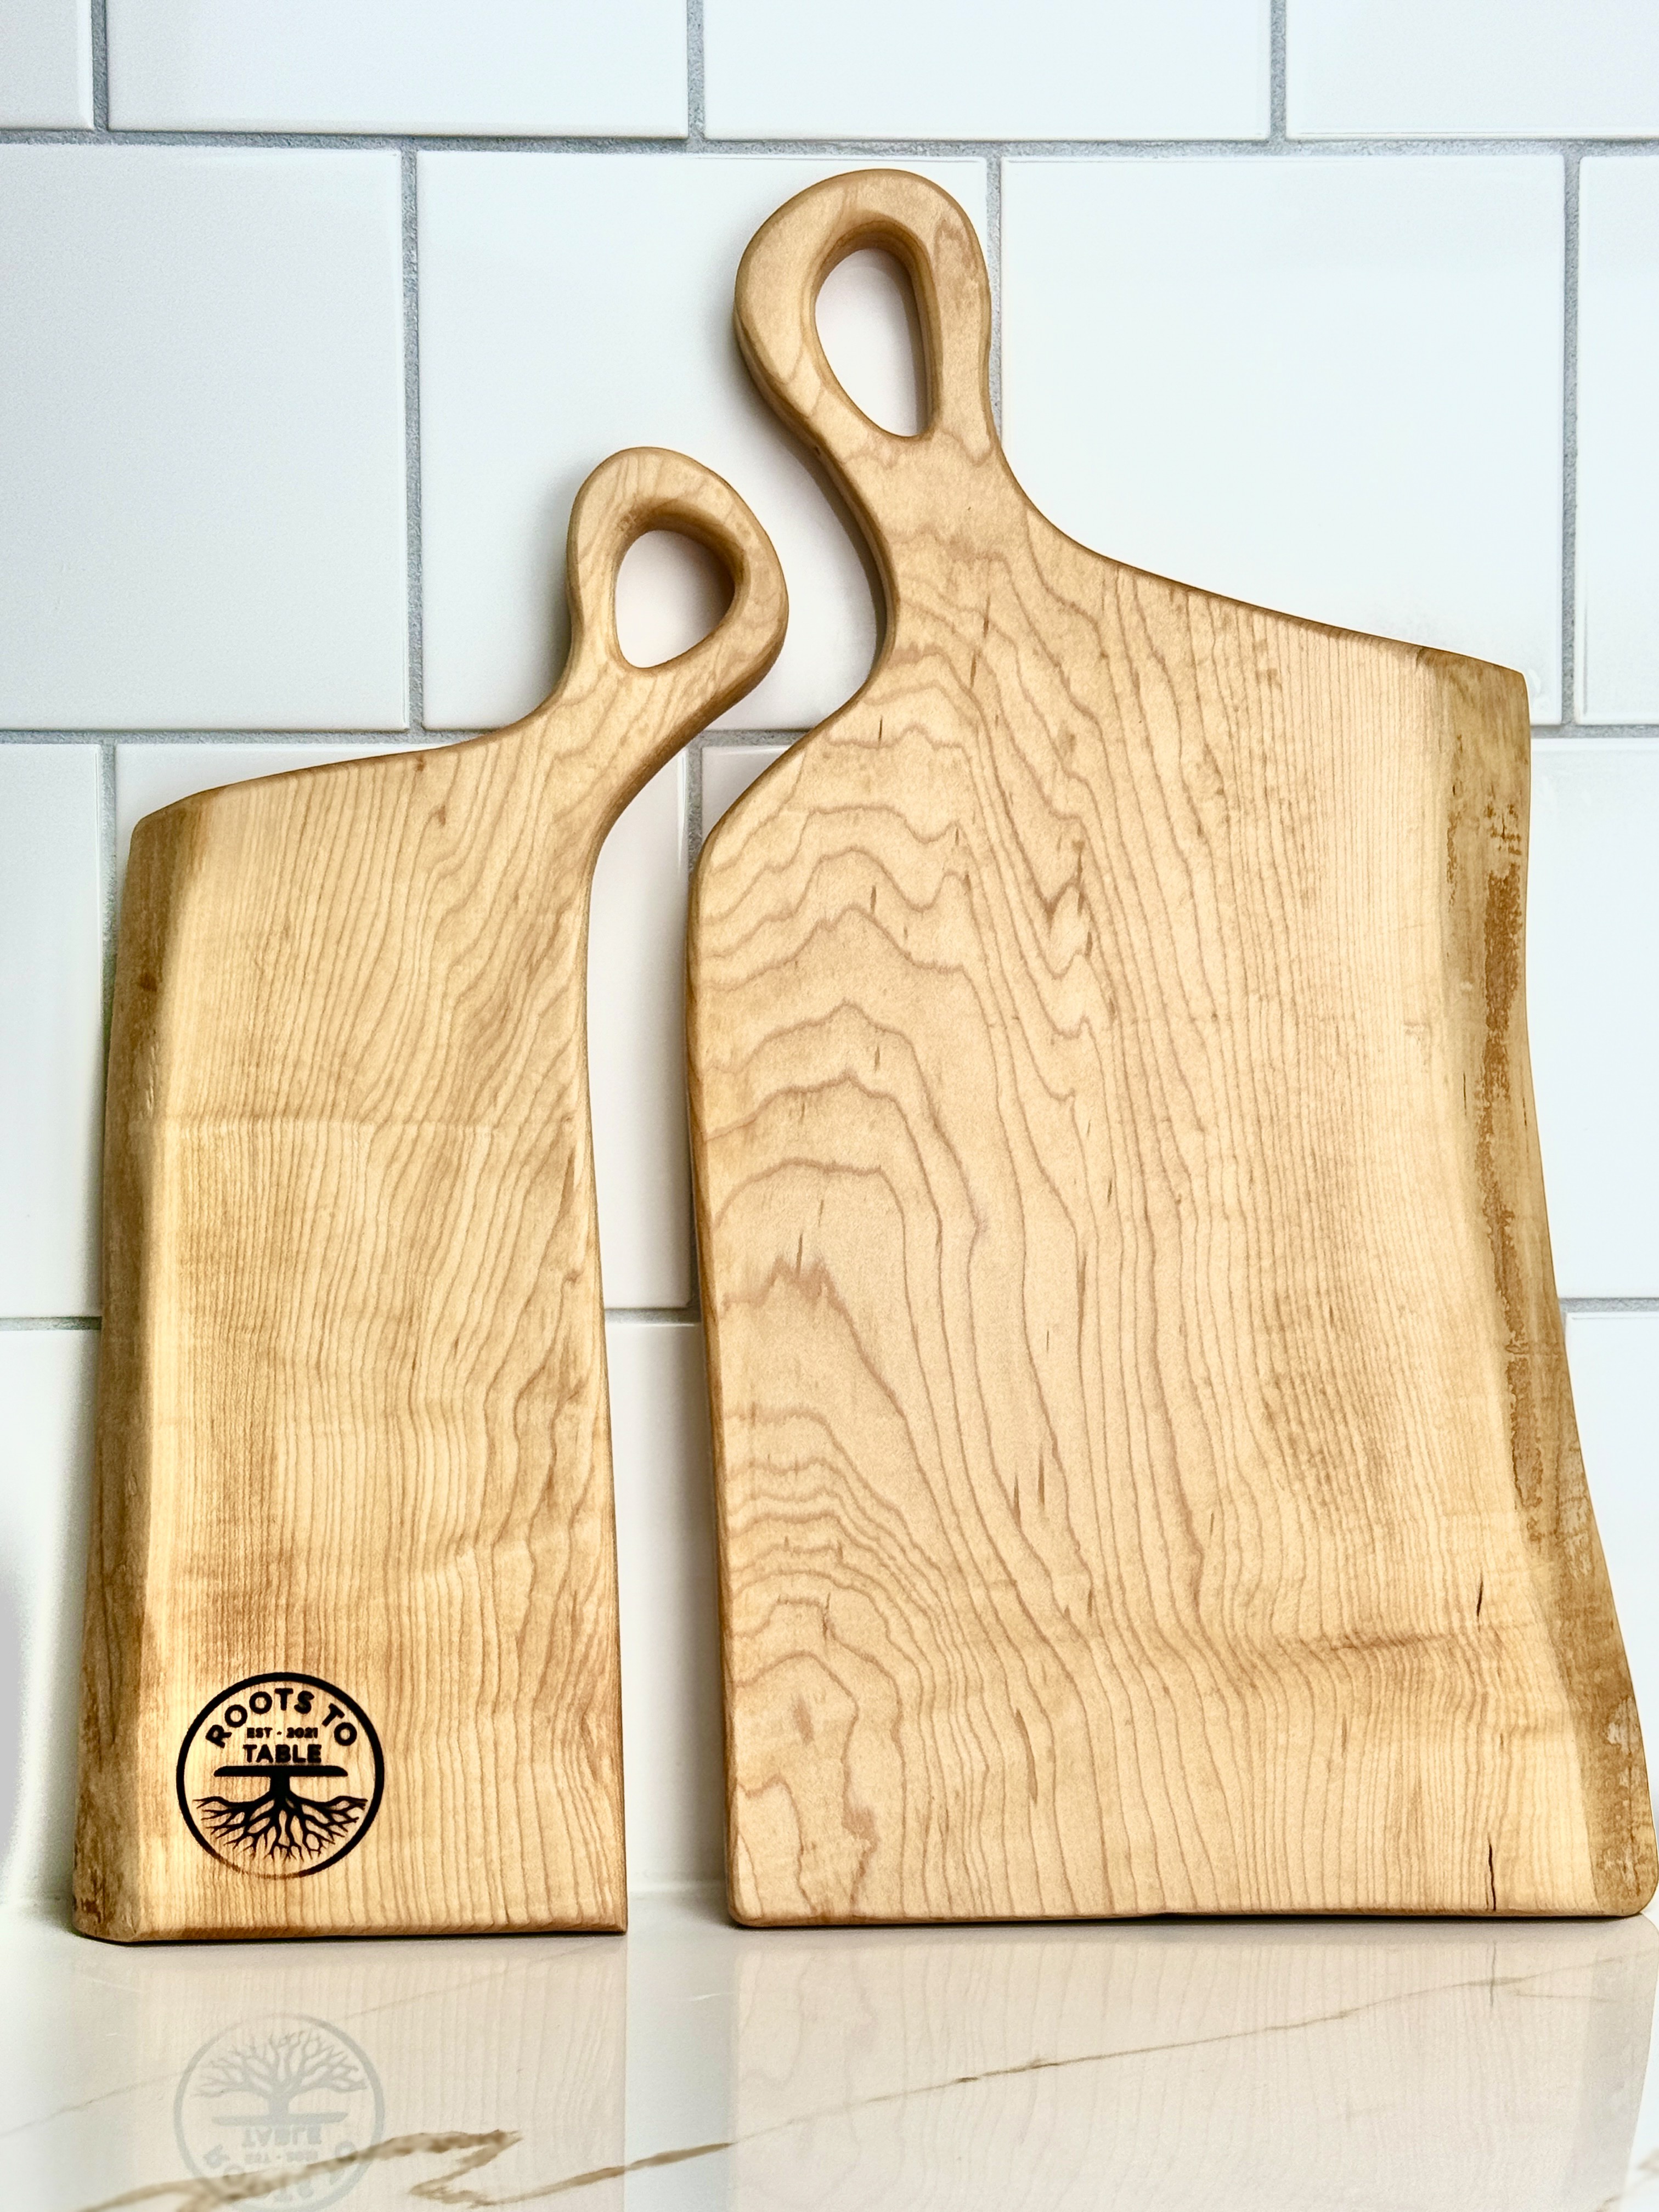 The nestling timbers crafted charcuterie board